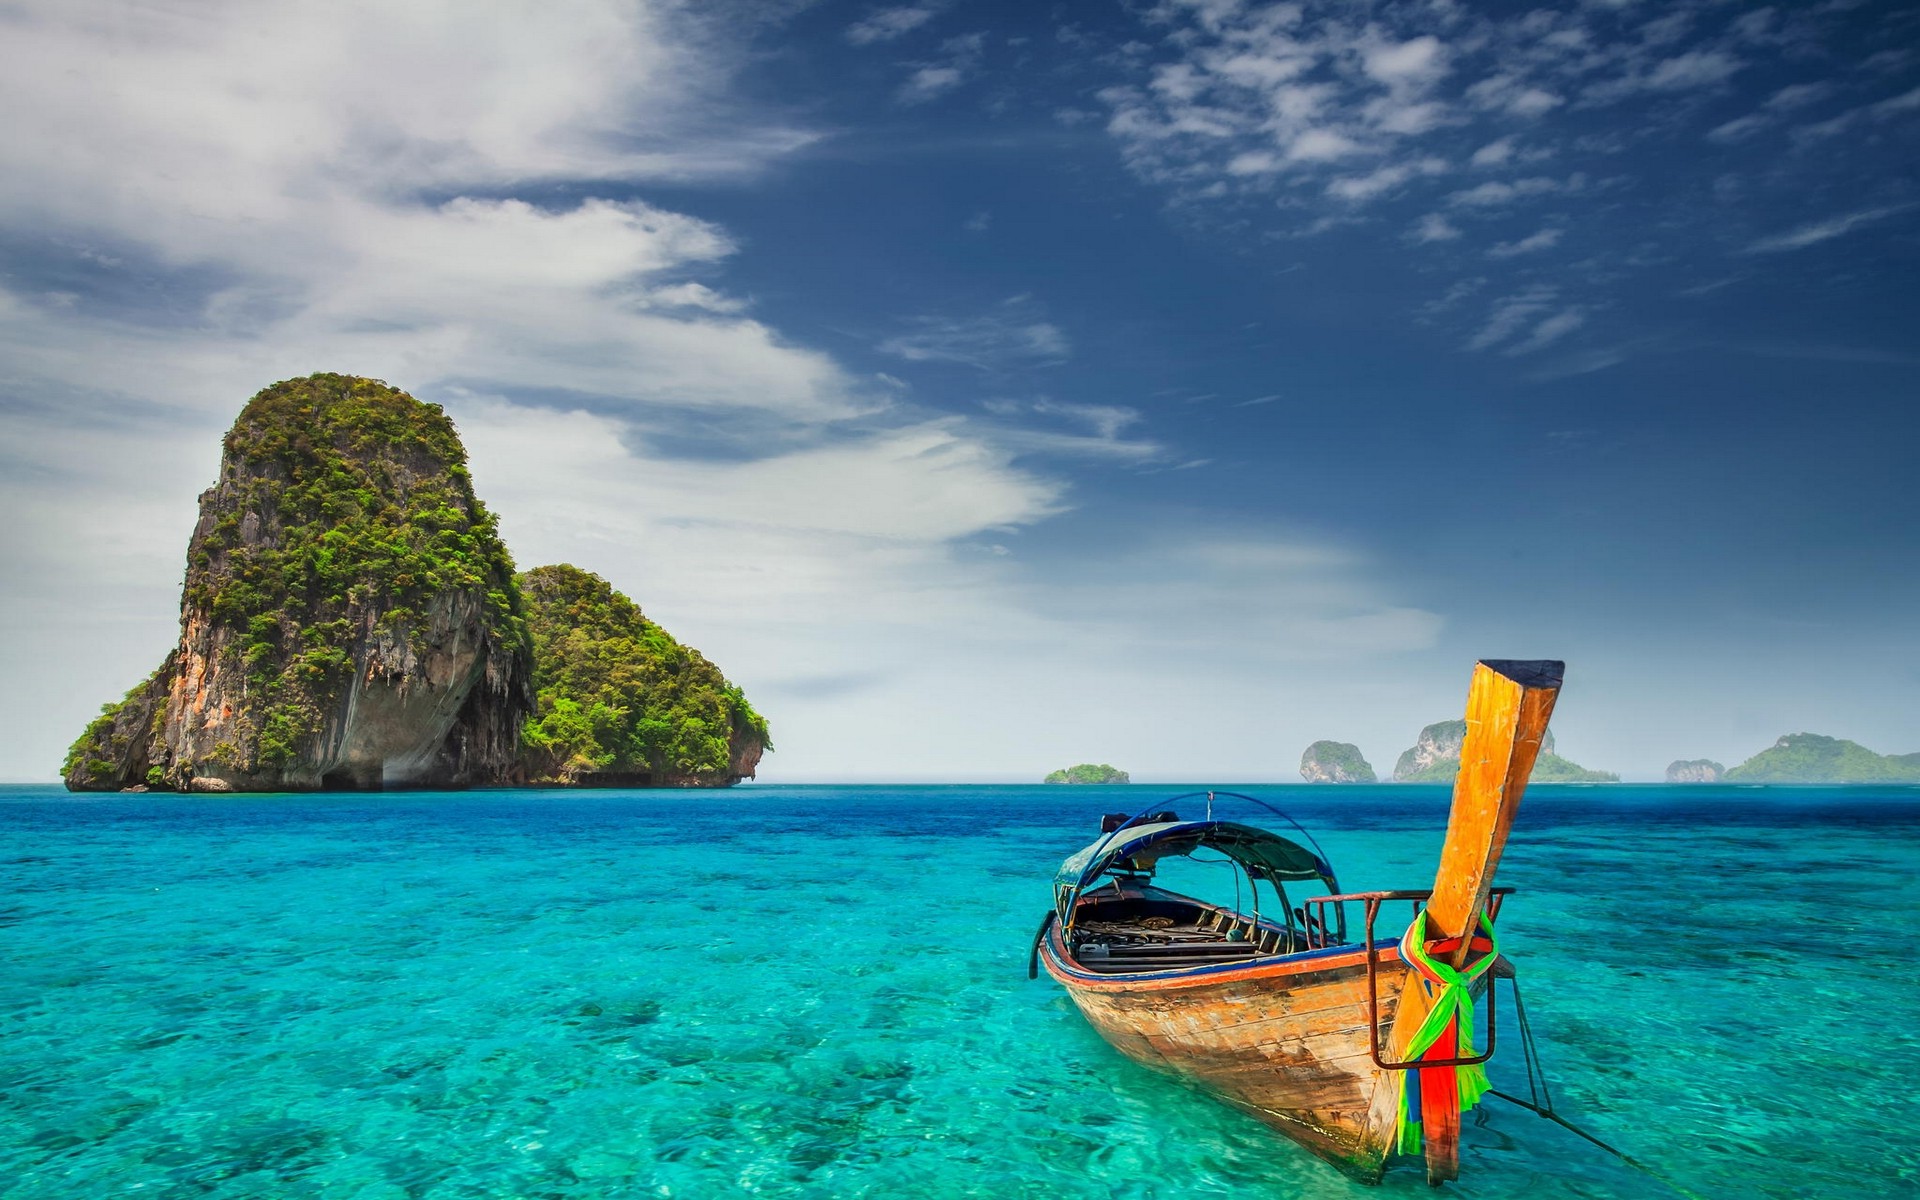 landscape, Railay Beach, Nature, Thailand, Cliff, Limestone, Island, Boat, Tropical, Sea, Turquoise, Summer, Clouds Wallpaper